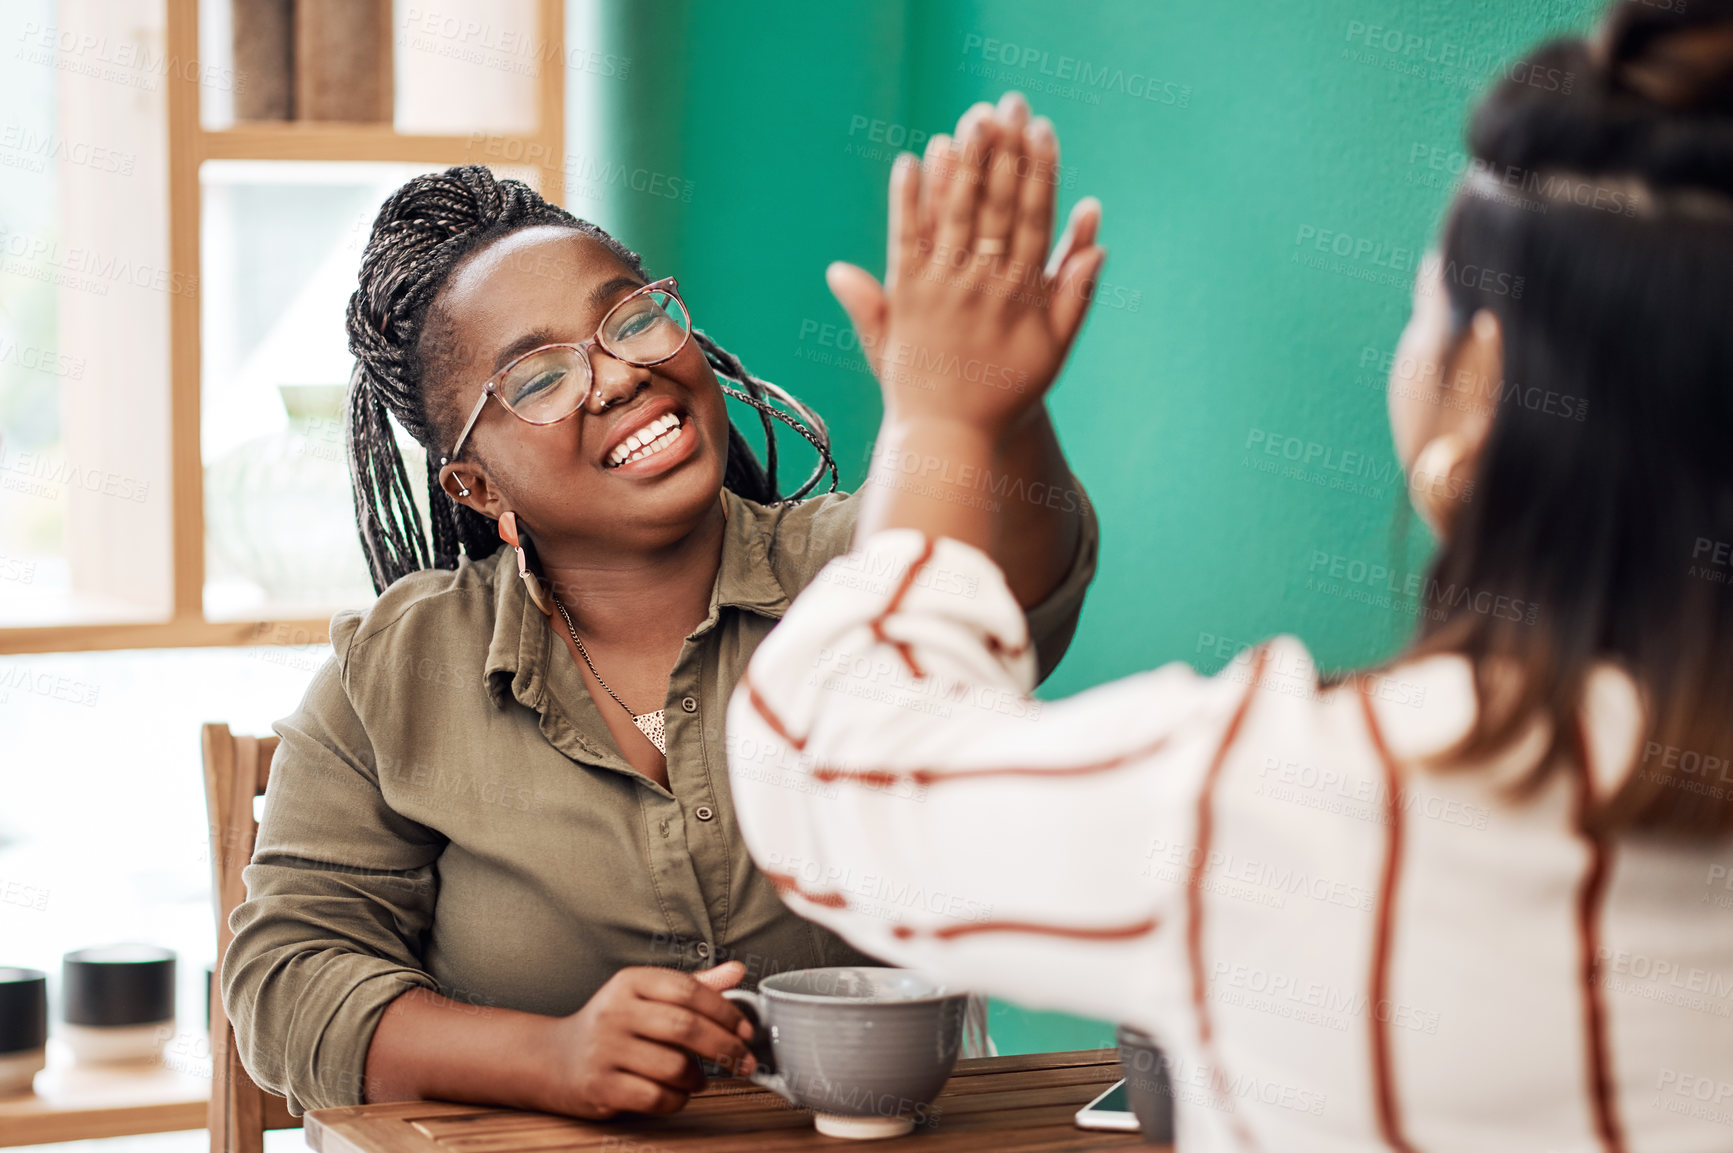 Buy stock photo Shot of two young women giving each other a high five in a cafe